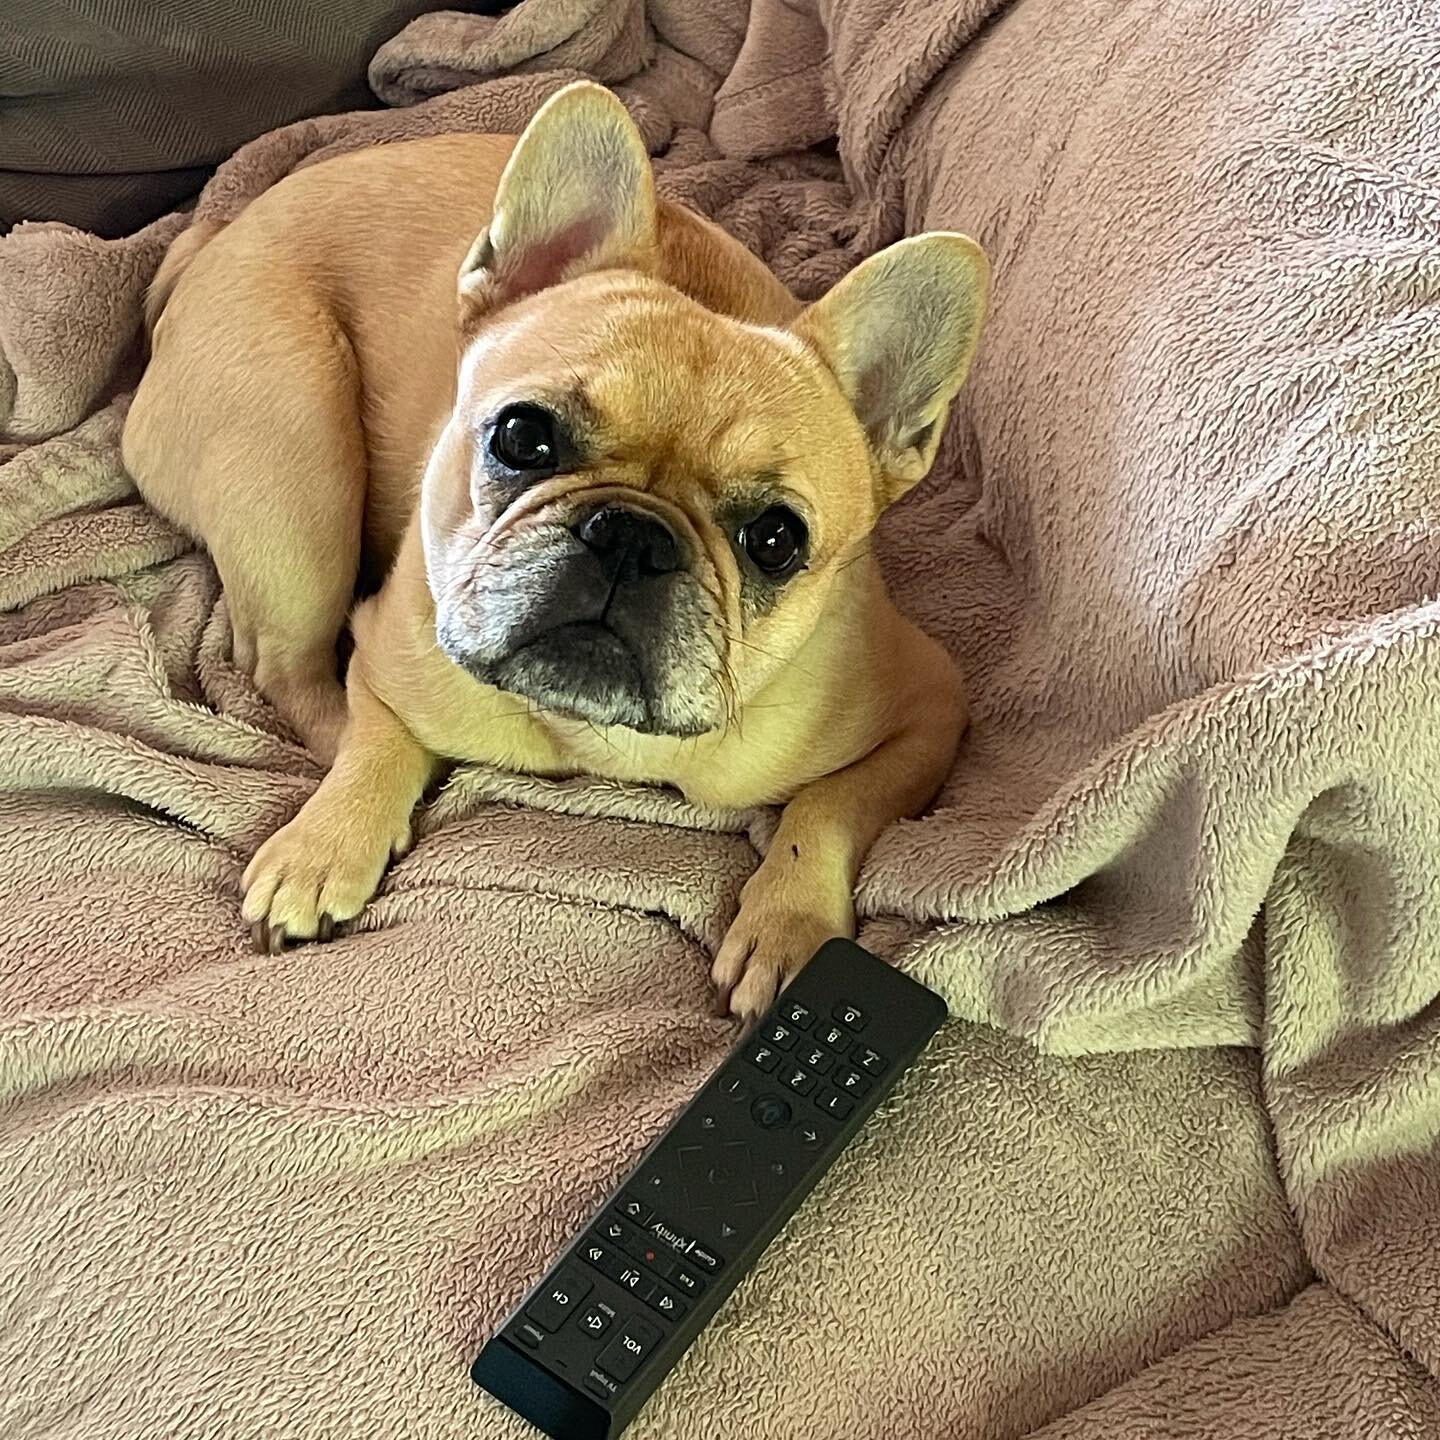 Will somebody please turn on Animal Planet for me? #dogswatchingtv #dogs #frenchiesofinstagram #frenchbulldog